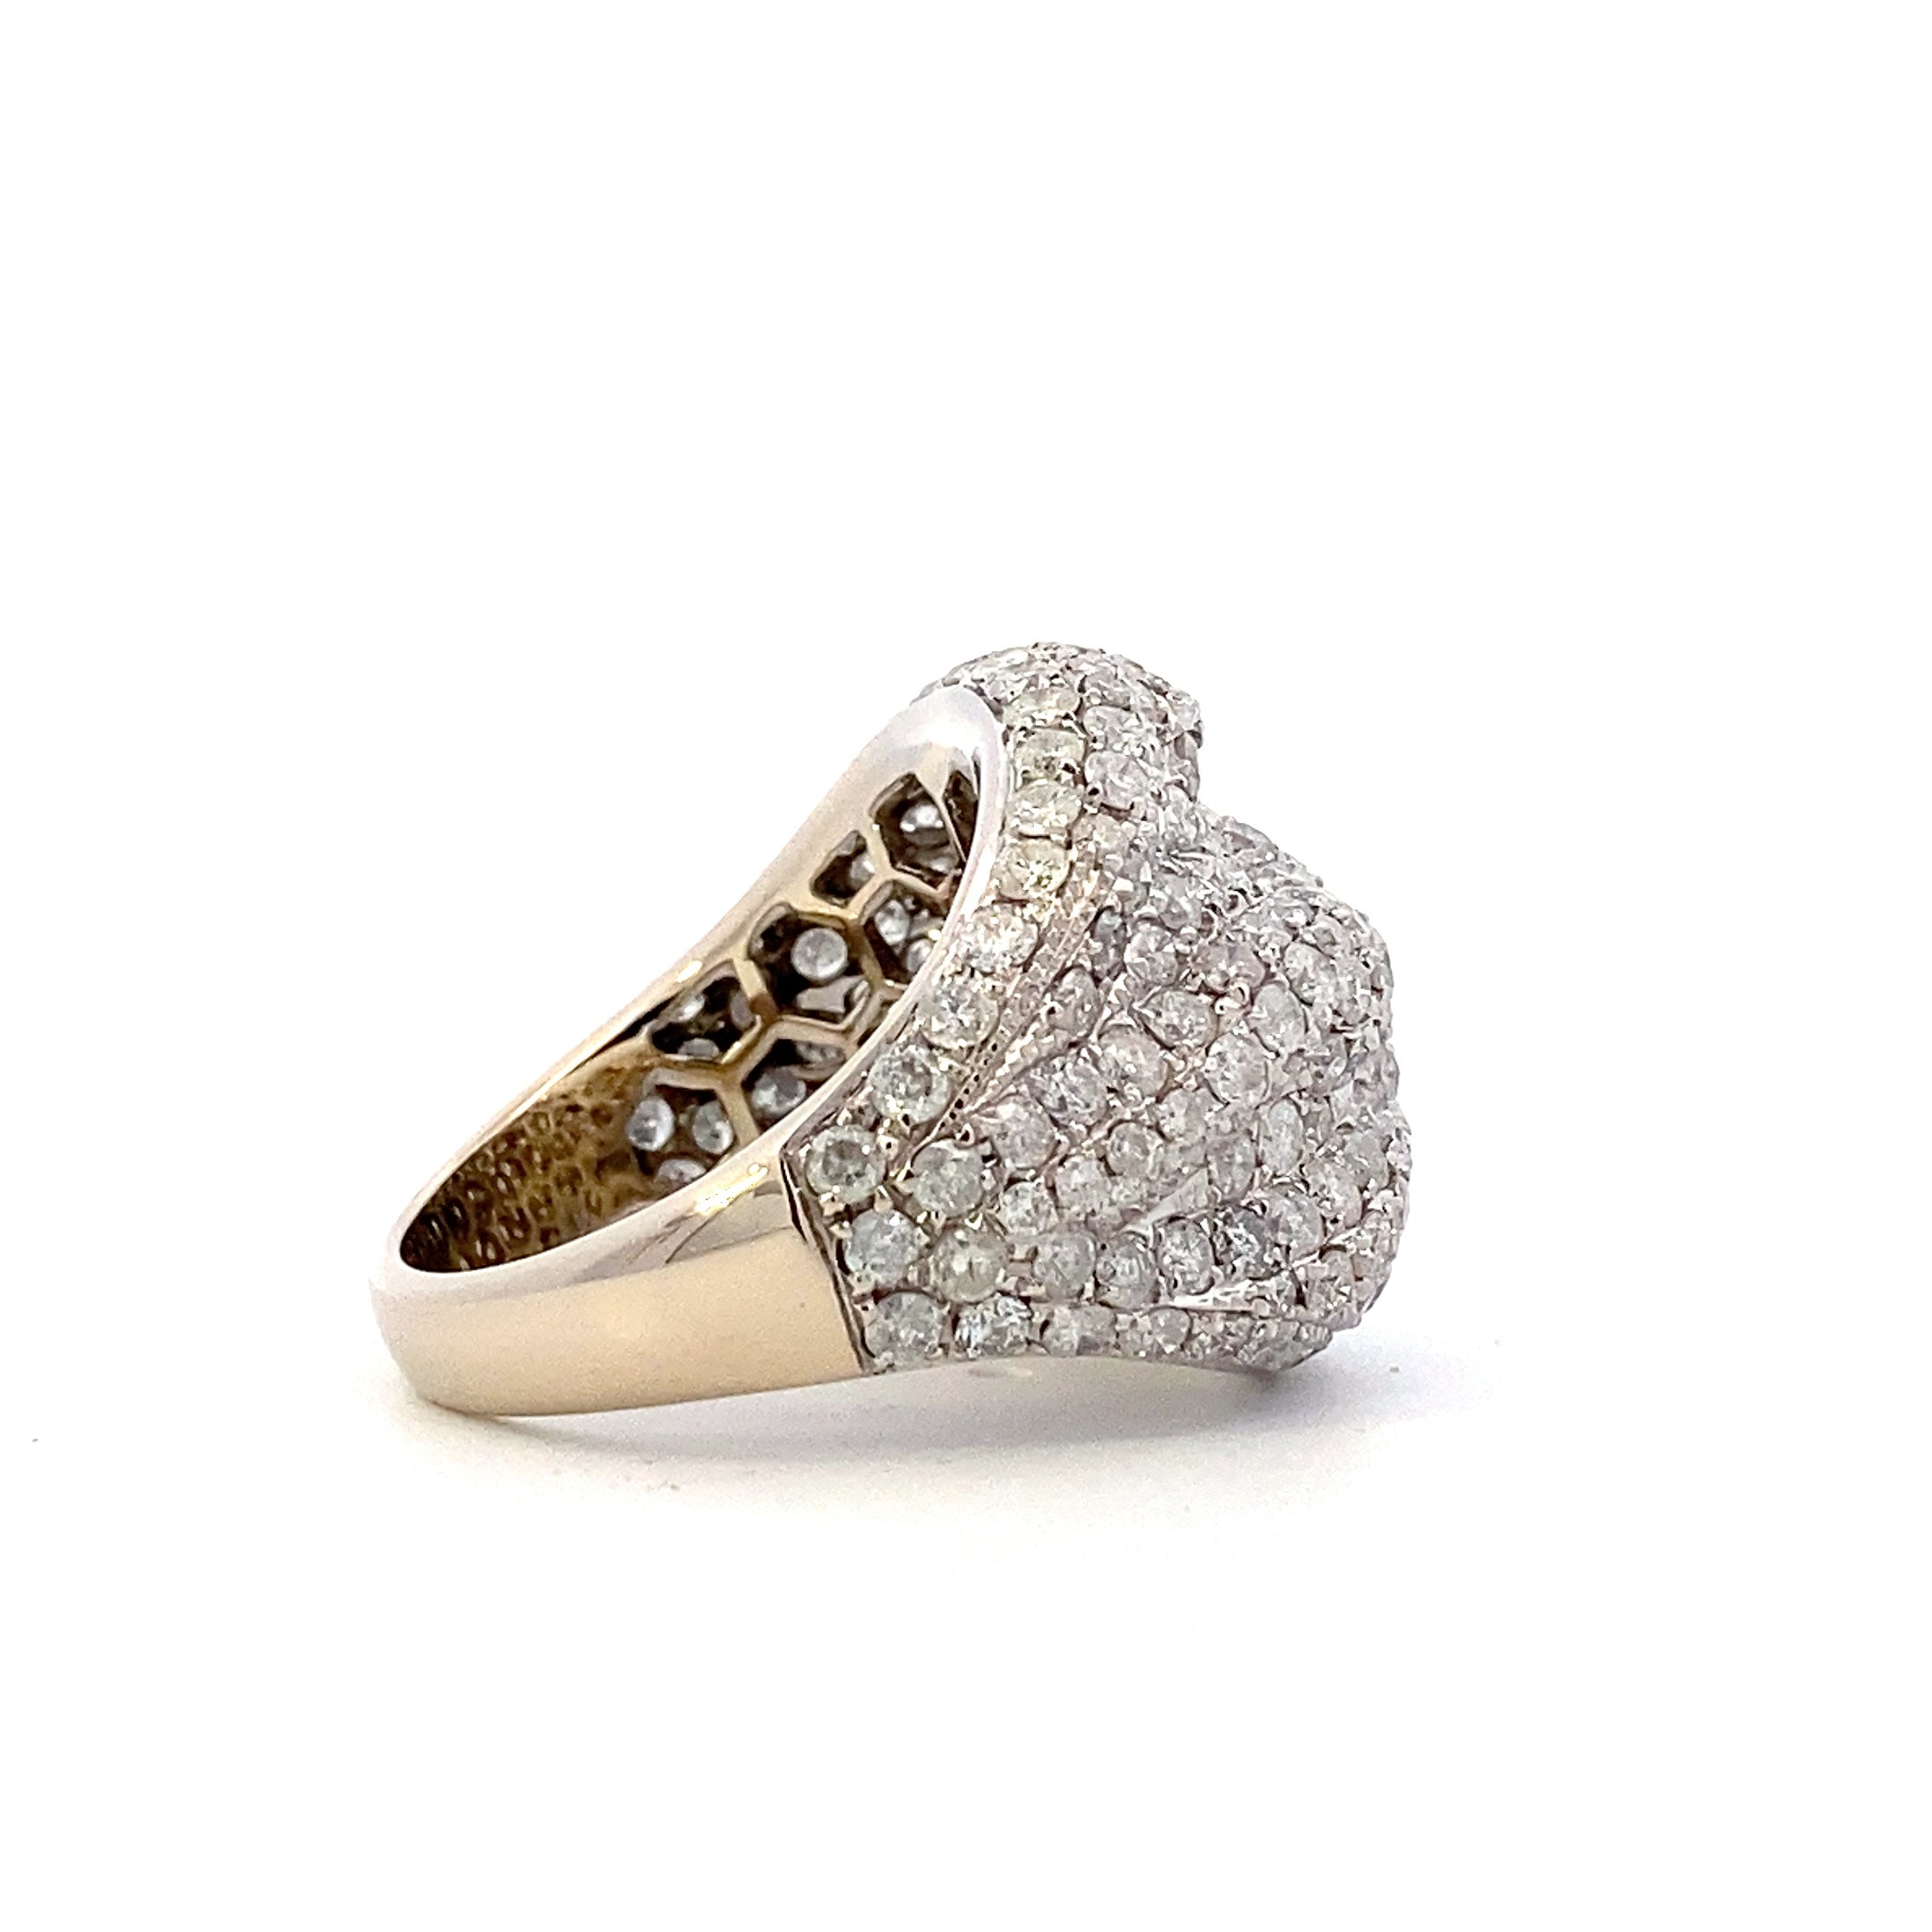 18K White Gold Diamond Pave Dome Ring - 4.44ct